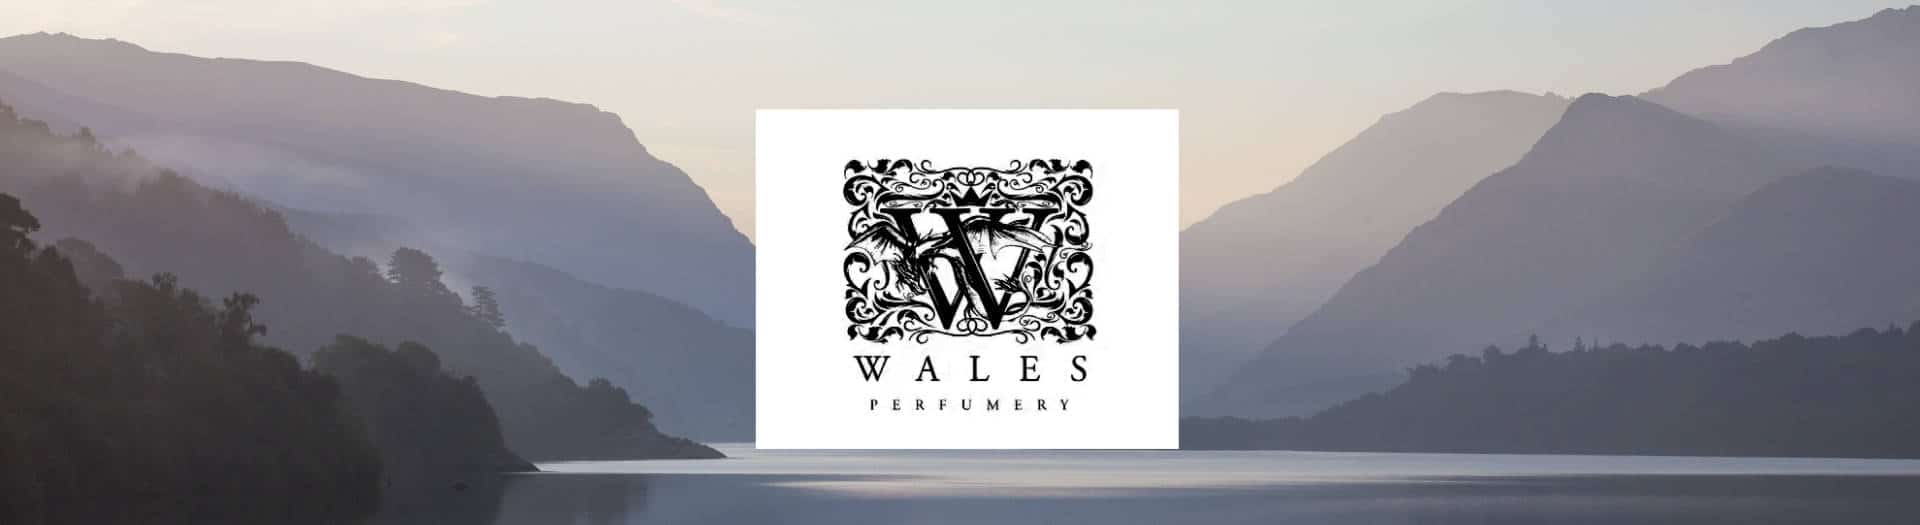 Wales perfumery brand header with logo on mountain background